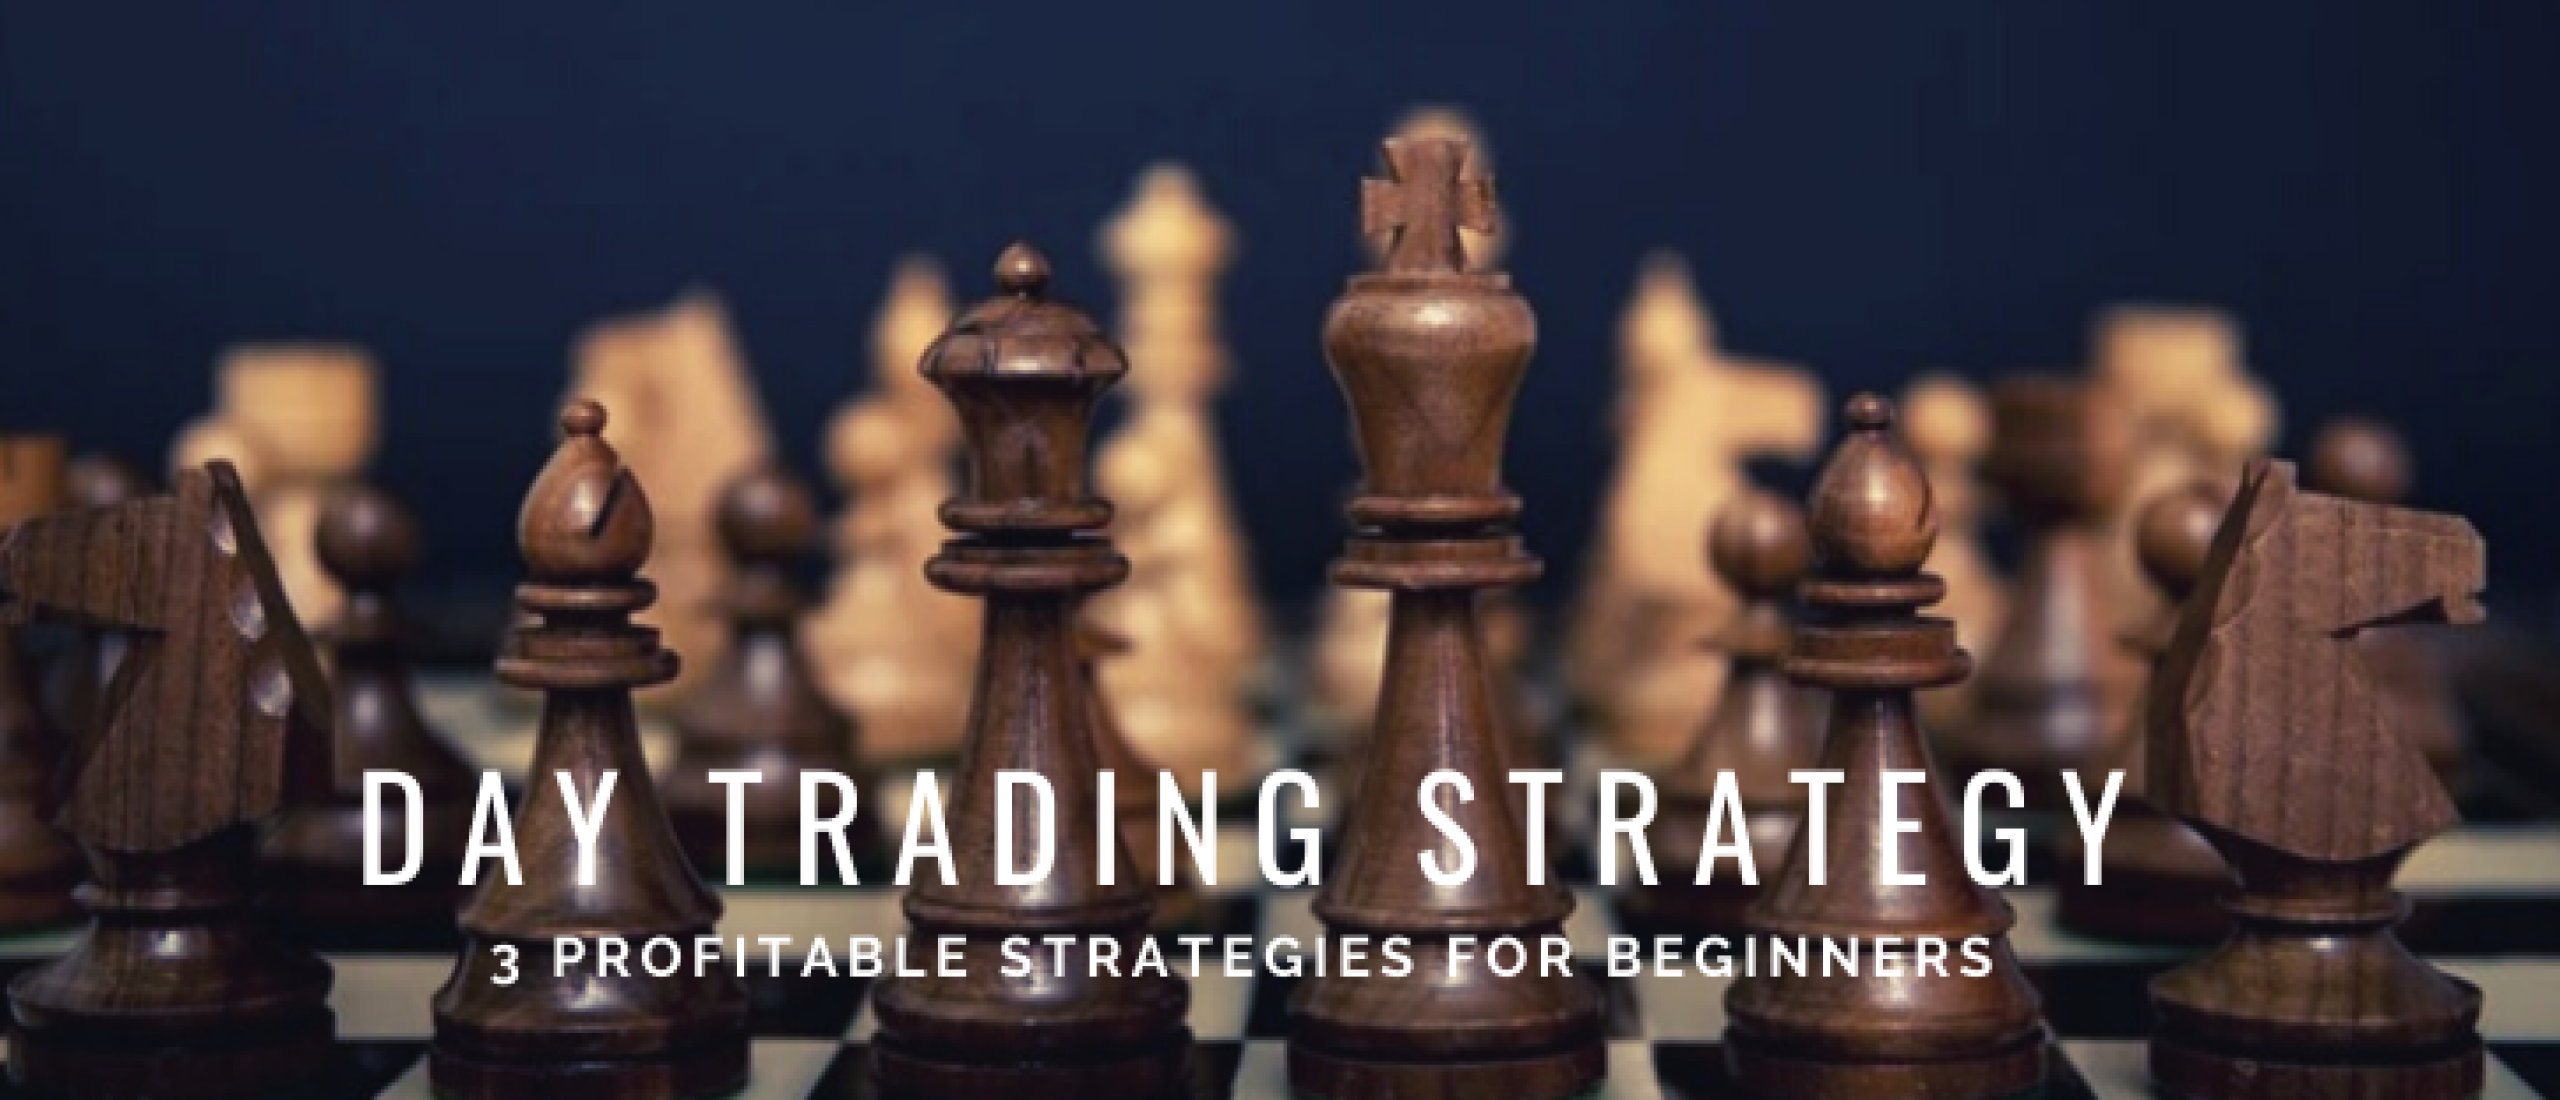 3x Profitable Day Trading Strategy for Beginners